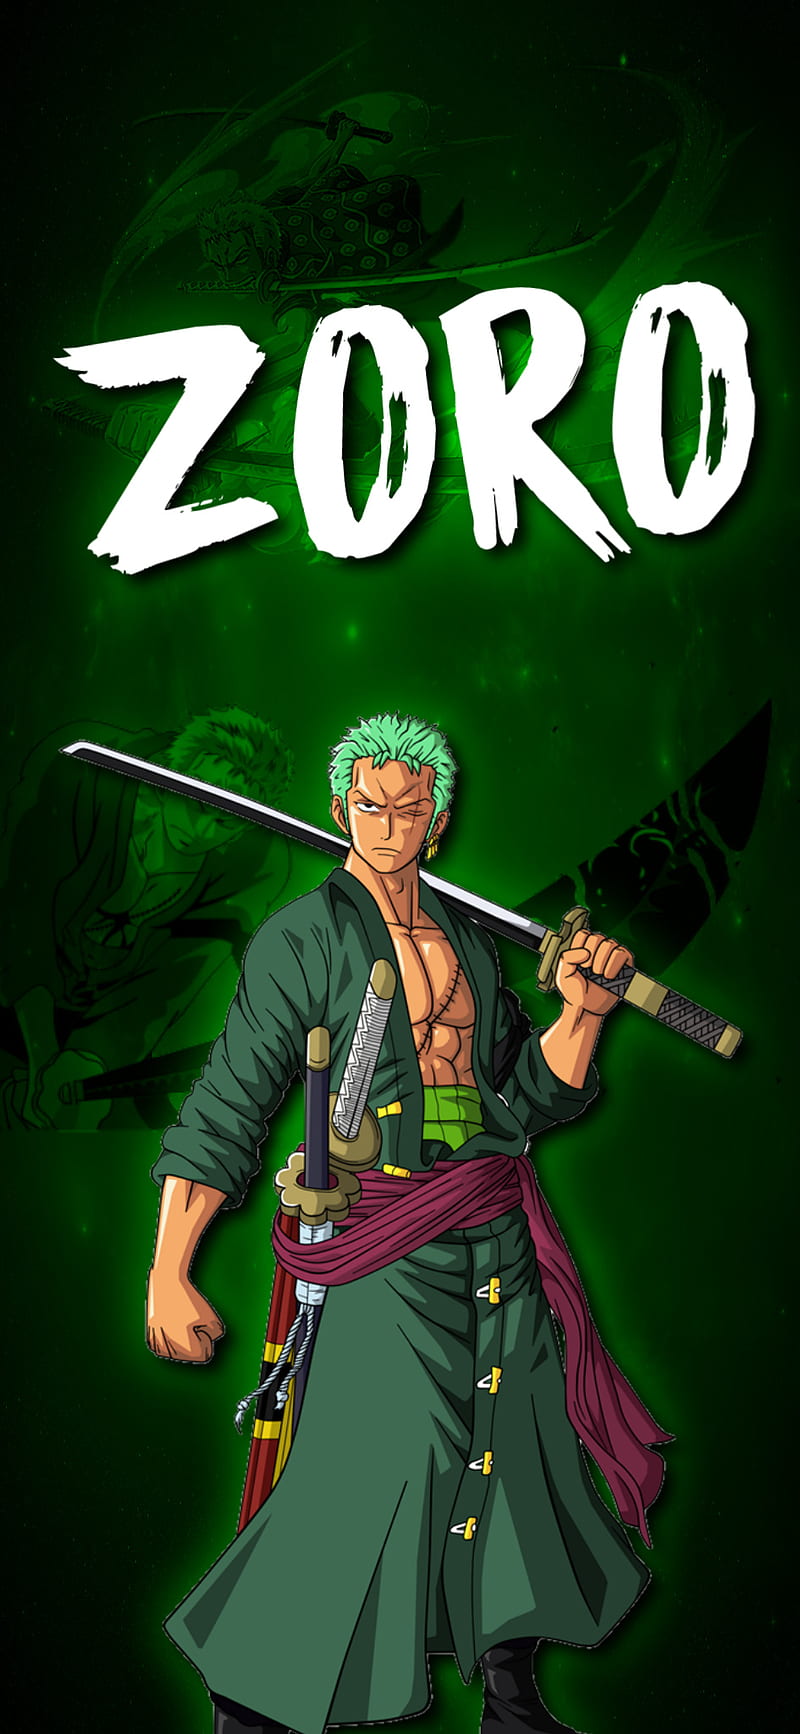 One Piece Zoro on Dog iPhone Wallpapers Free Download